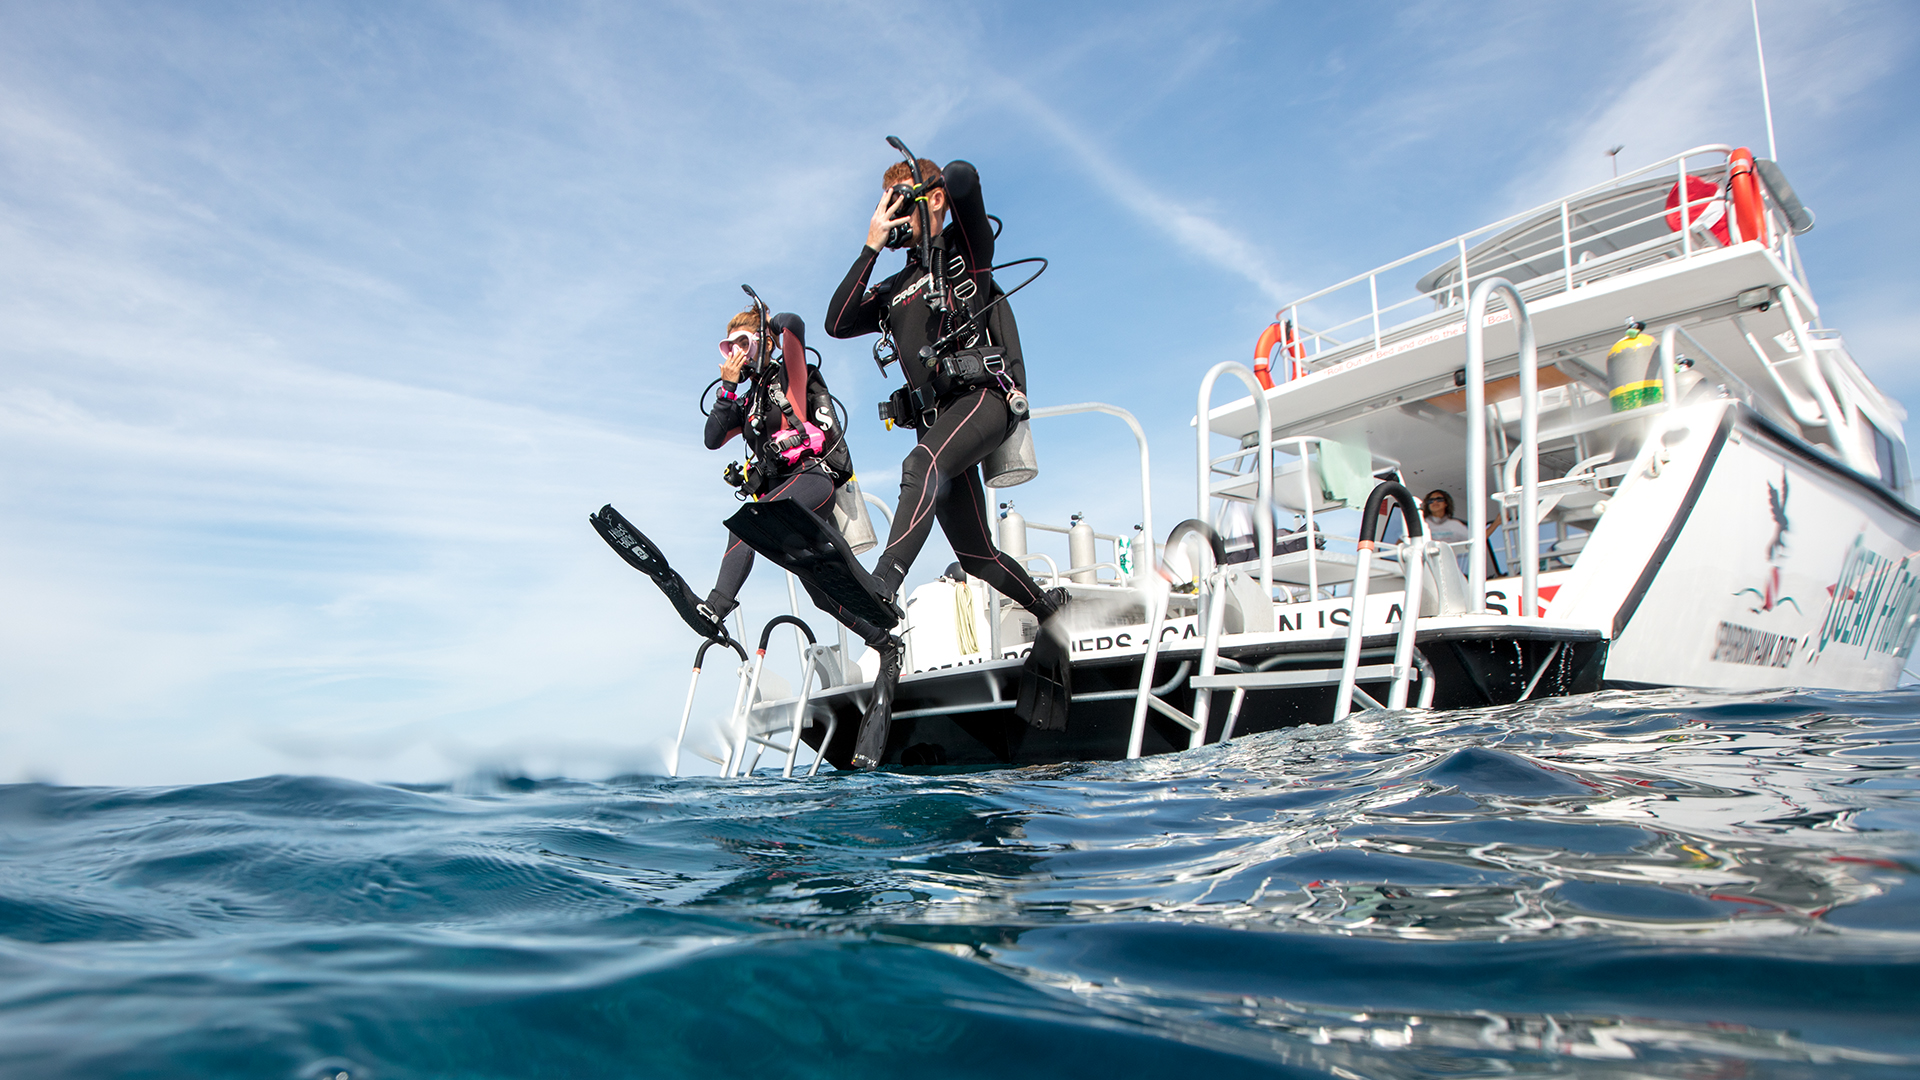 Two scuba divers entering the water; in the English language you can either say they dived into or dove into the water